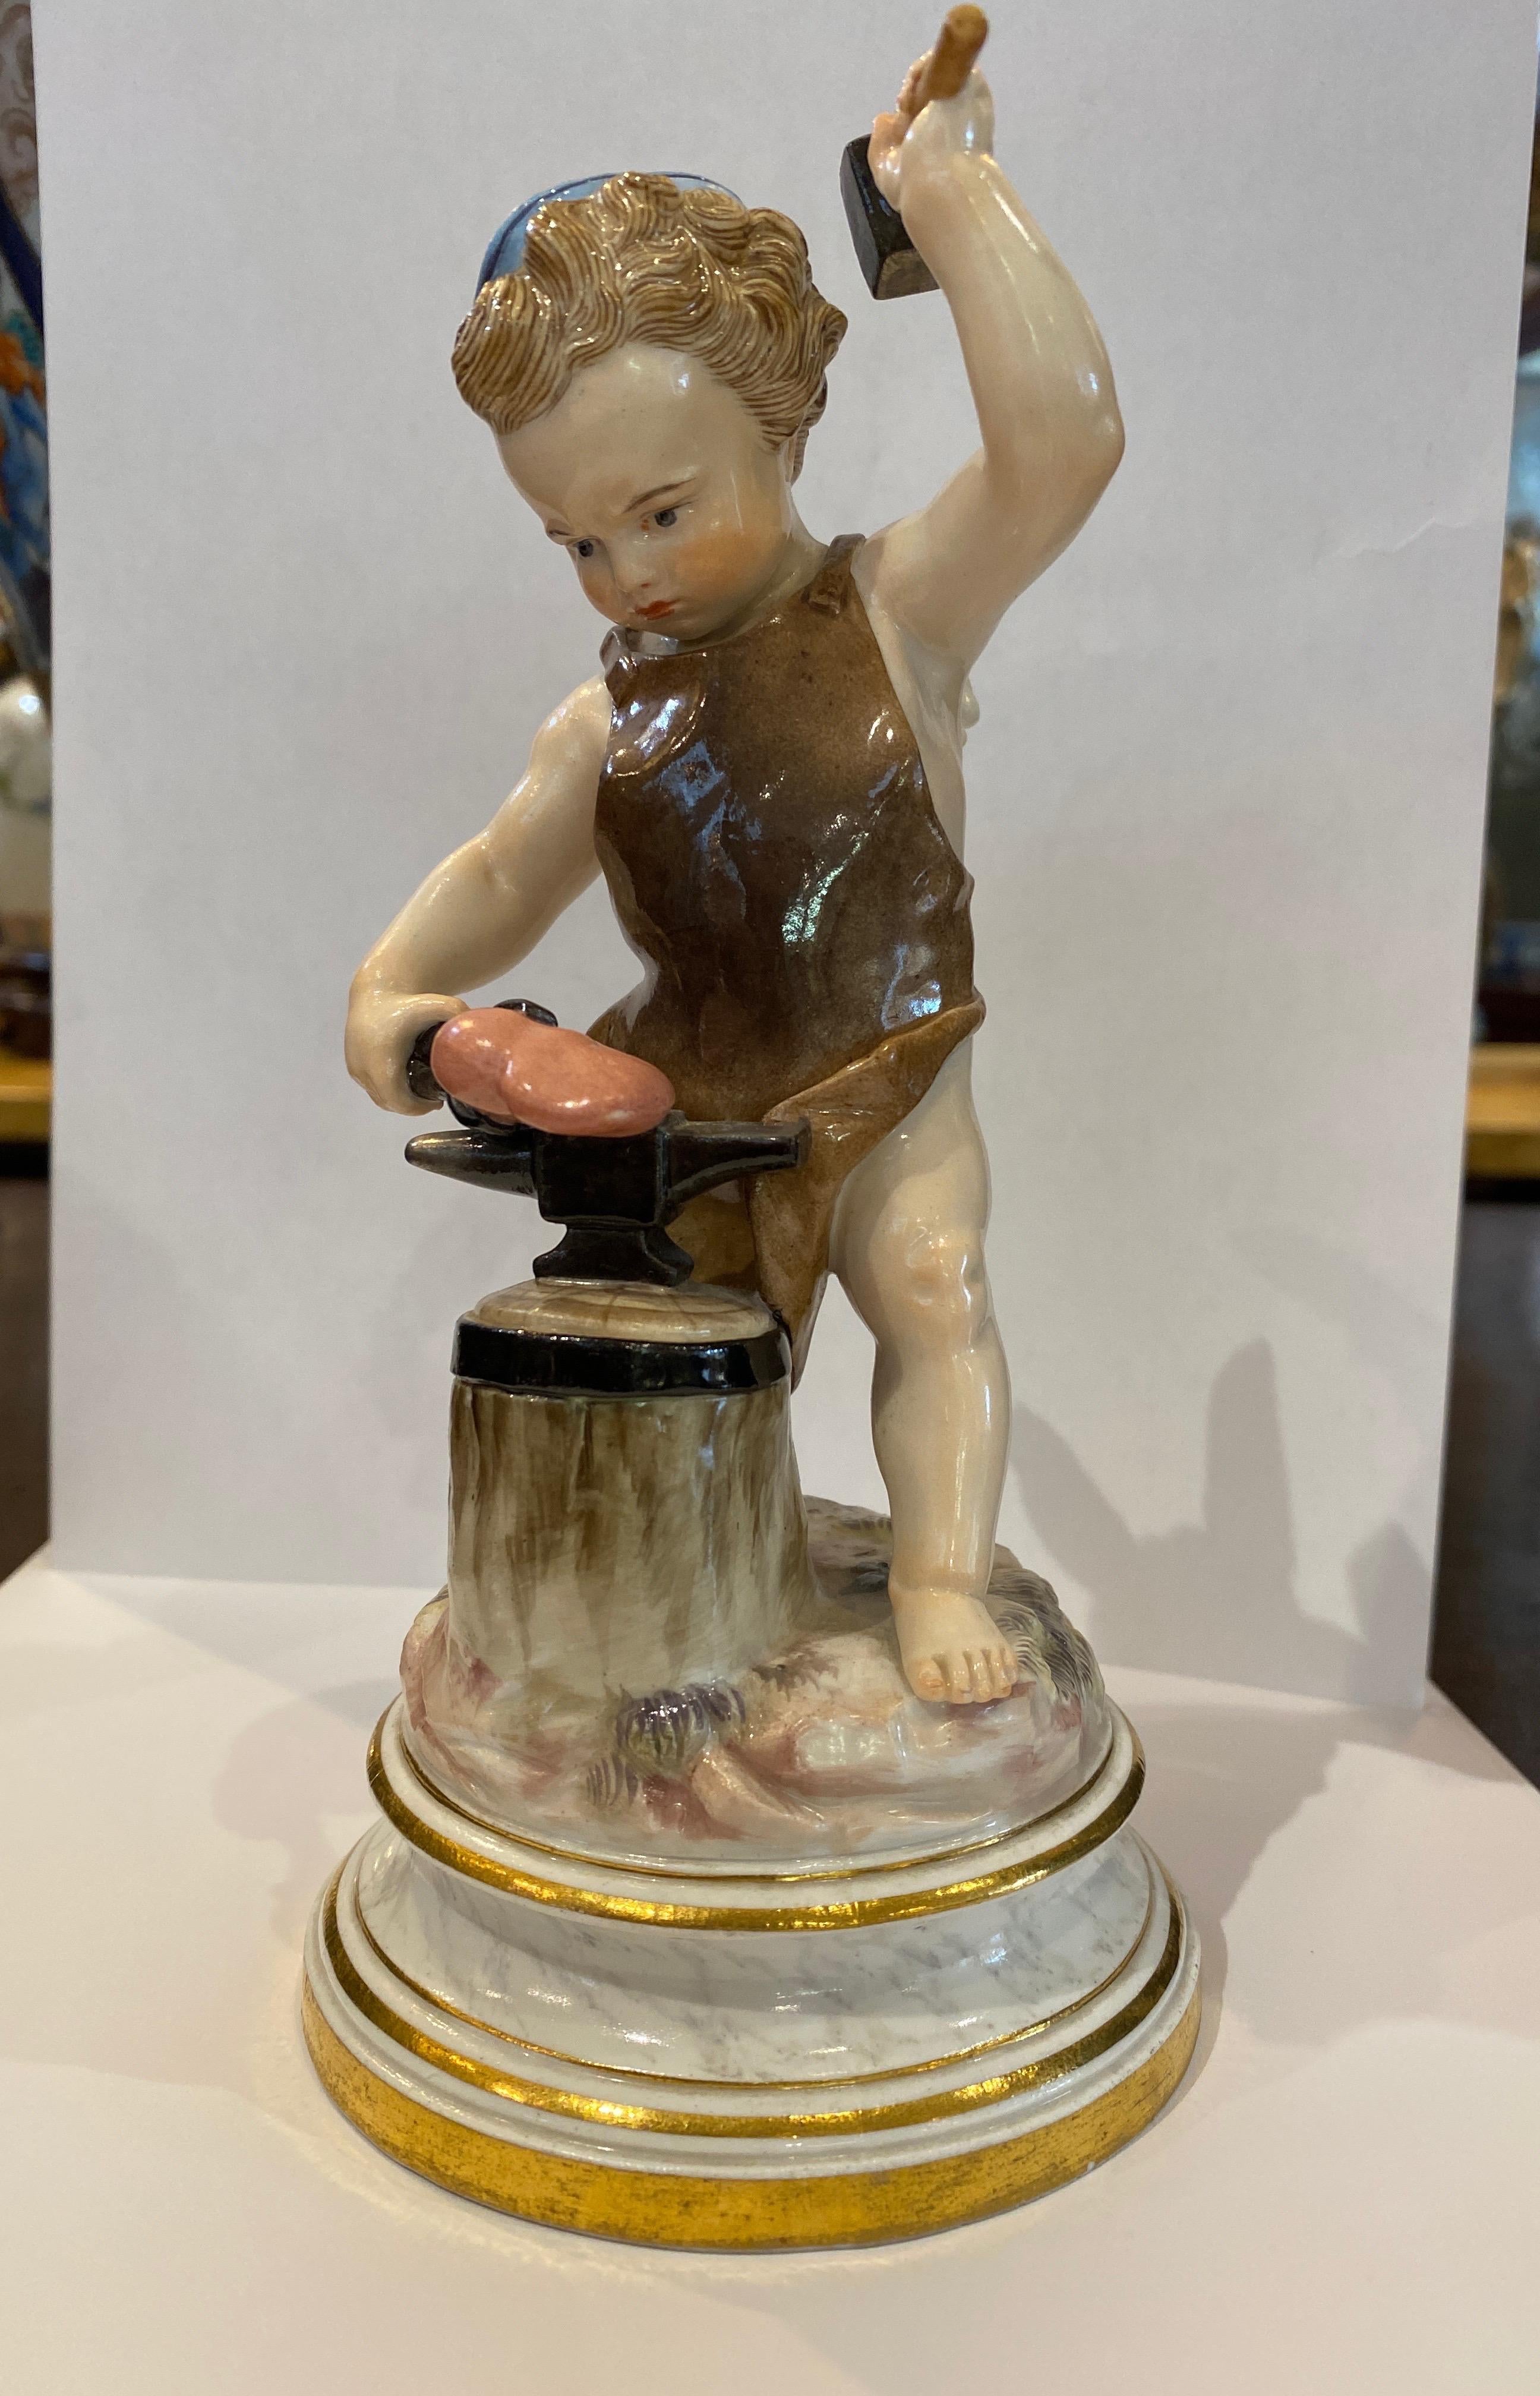 Meissen Porcelain figure of cupid forging a heart on a blacksmiths anvil which rests on a block of tree stump. The barefooted figure wearing a dark blue cap and dressed in a brown leather smock, mounted on a circular marbled base with gilt